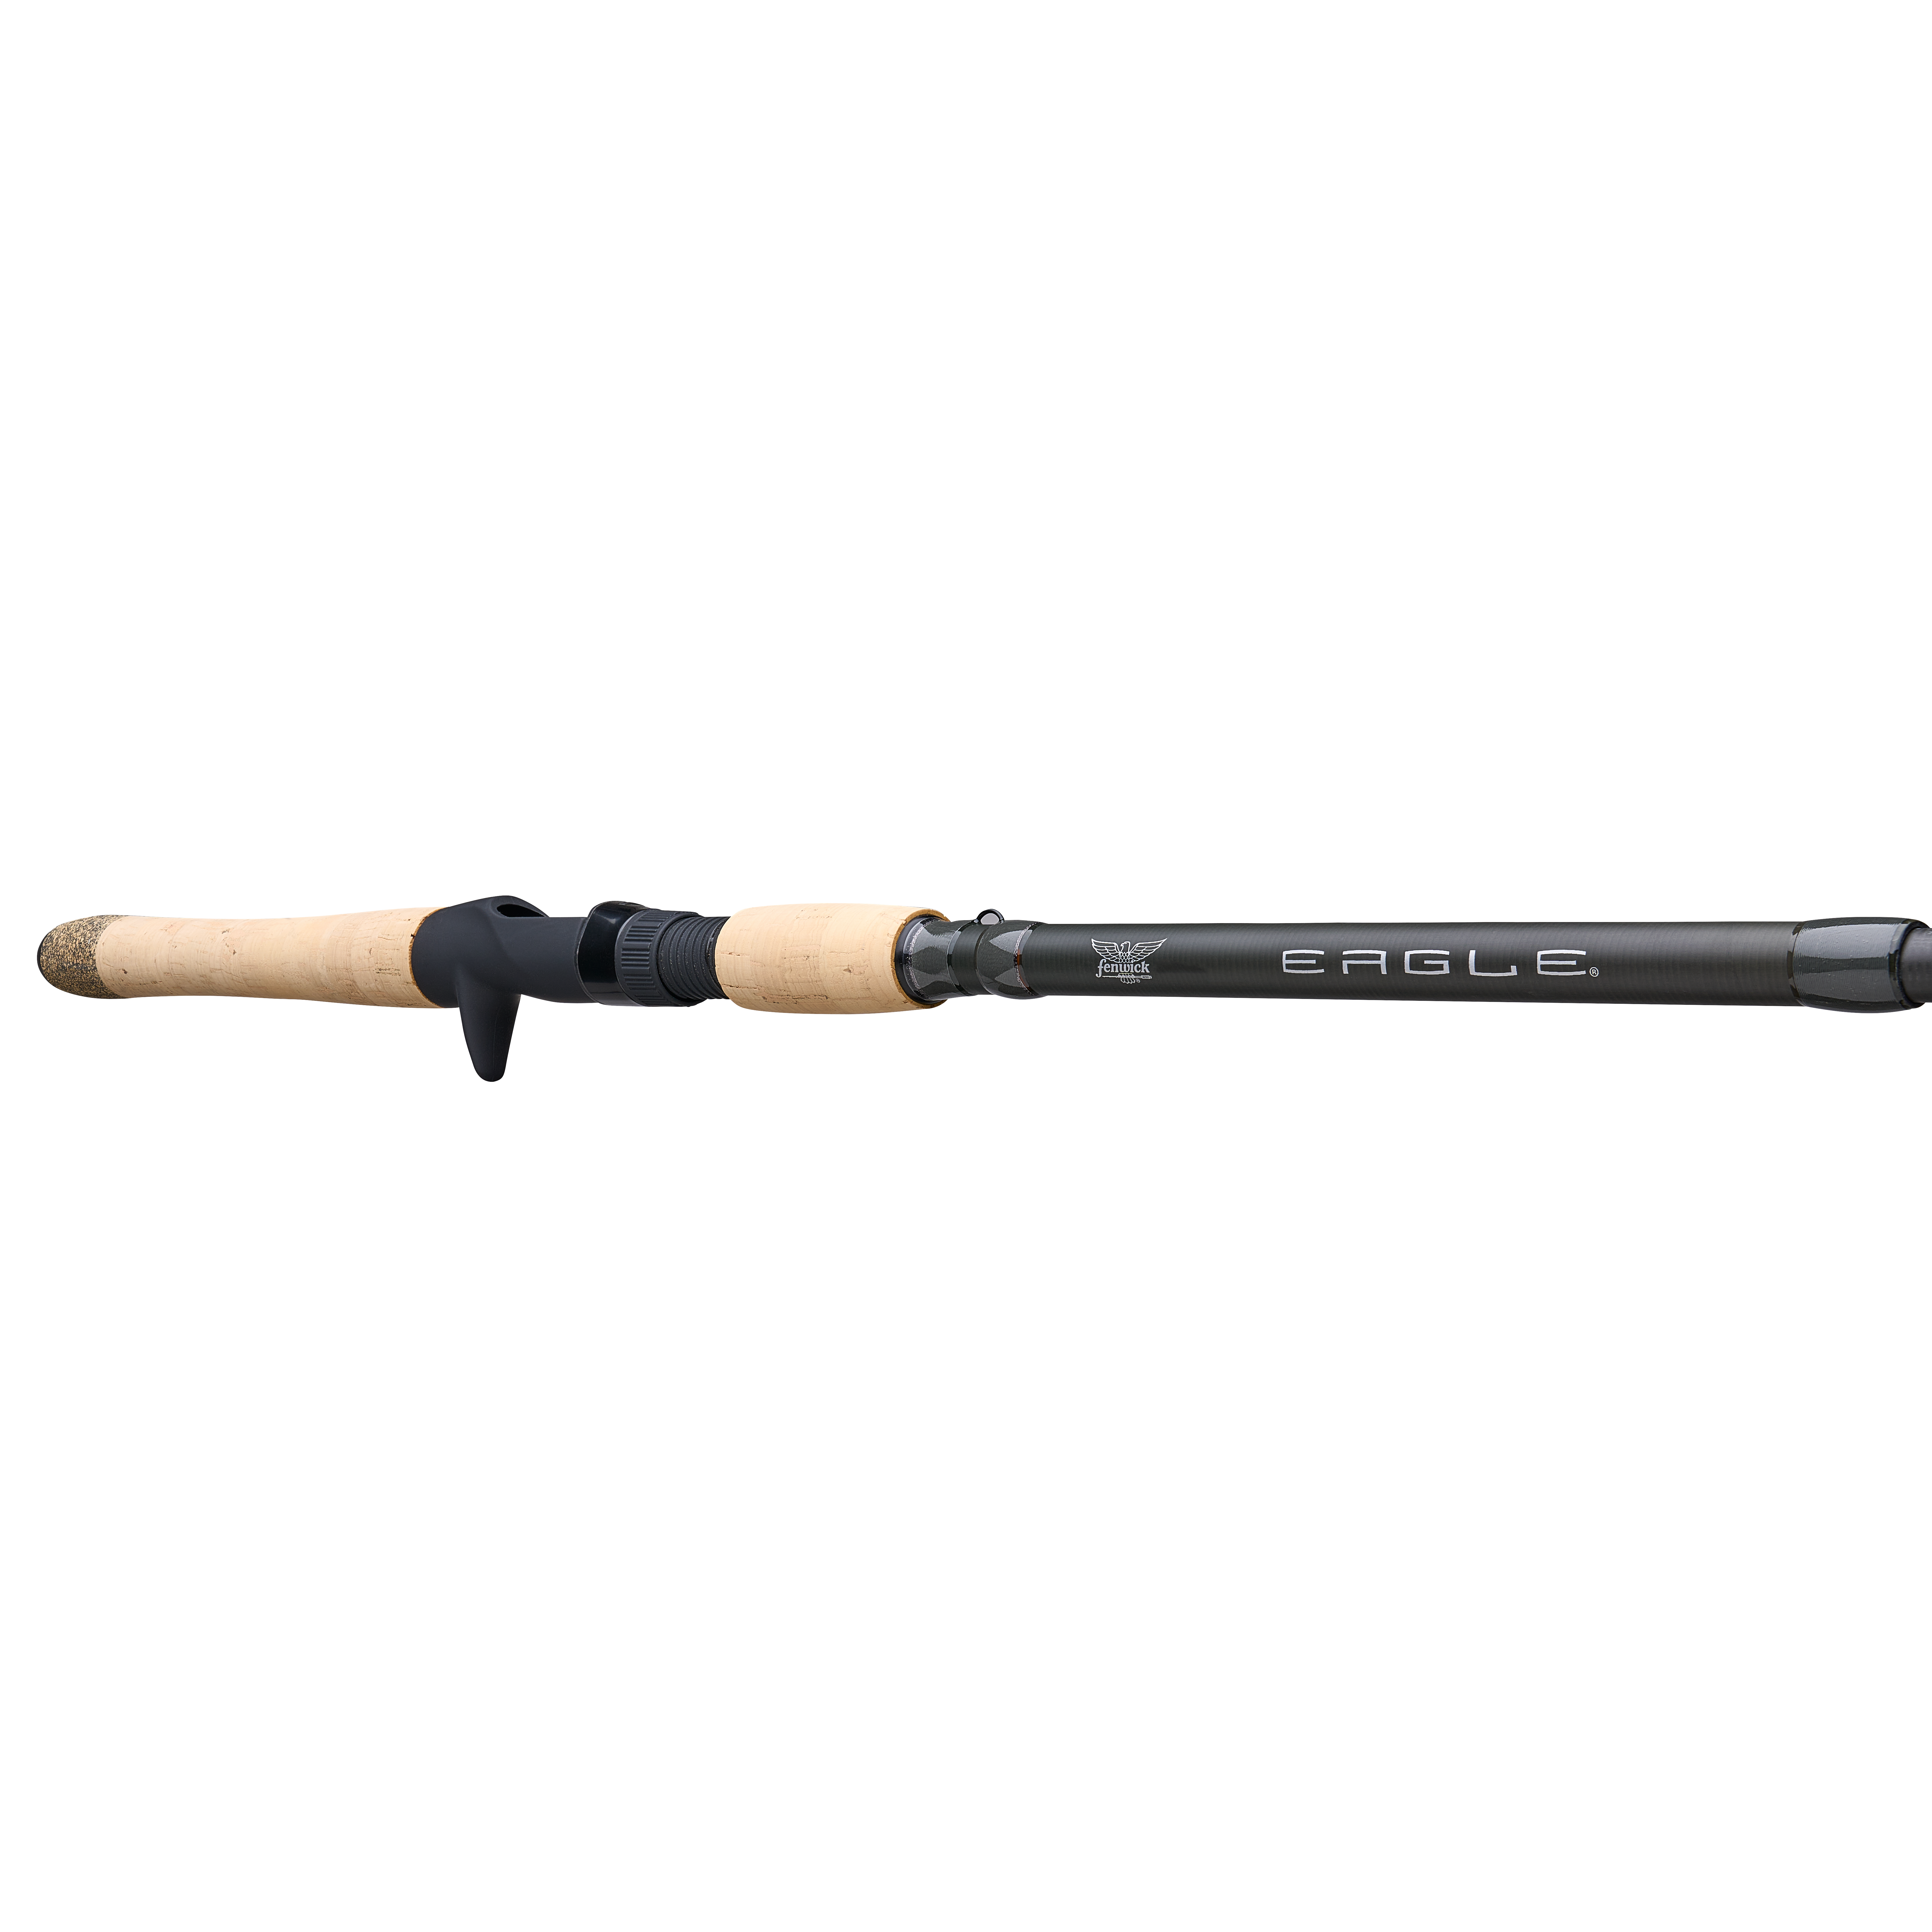 Fenwick ATS15LCX-EAG86M-MFC-T Fenwick-ATS15LCX-EAG86M-MFC-T Eagle Trolling  Rod 8ft 6in Telescoping Medium Moderate Fast with Shakespear Agility  Trolling Line Counter Reel 0 Separately Fixed